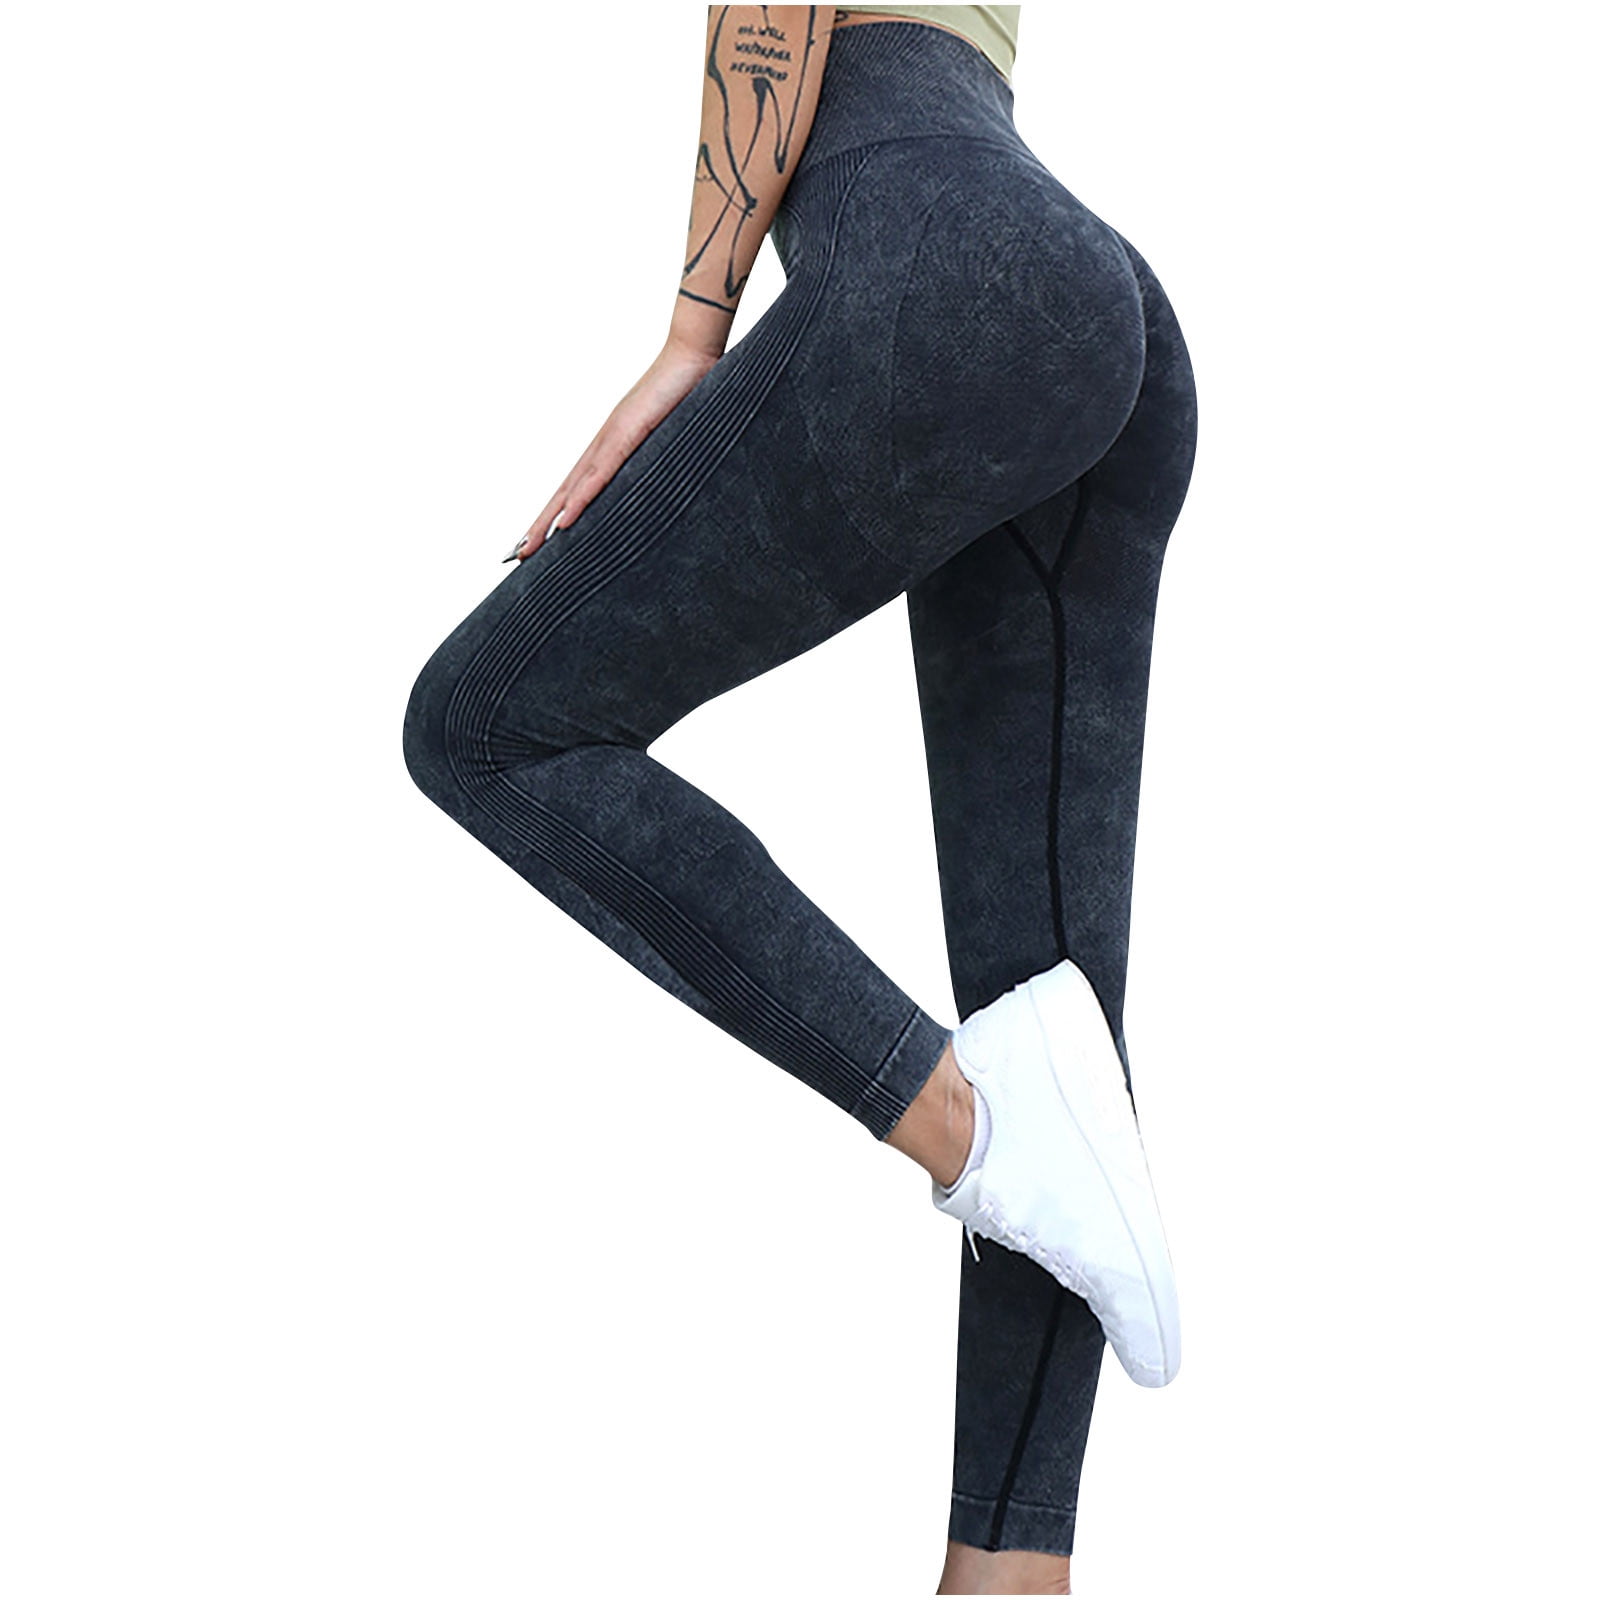 Seamless High Waist Yoga Leggings For Women Booty Lifting Gym Outfit, Sexy  Sports Clothing For Tight Gym Wear Style 231114 From Dao06, $8.3